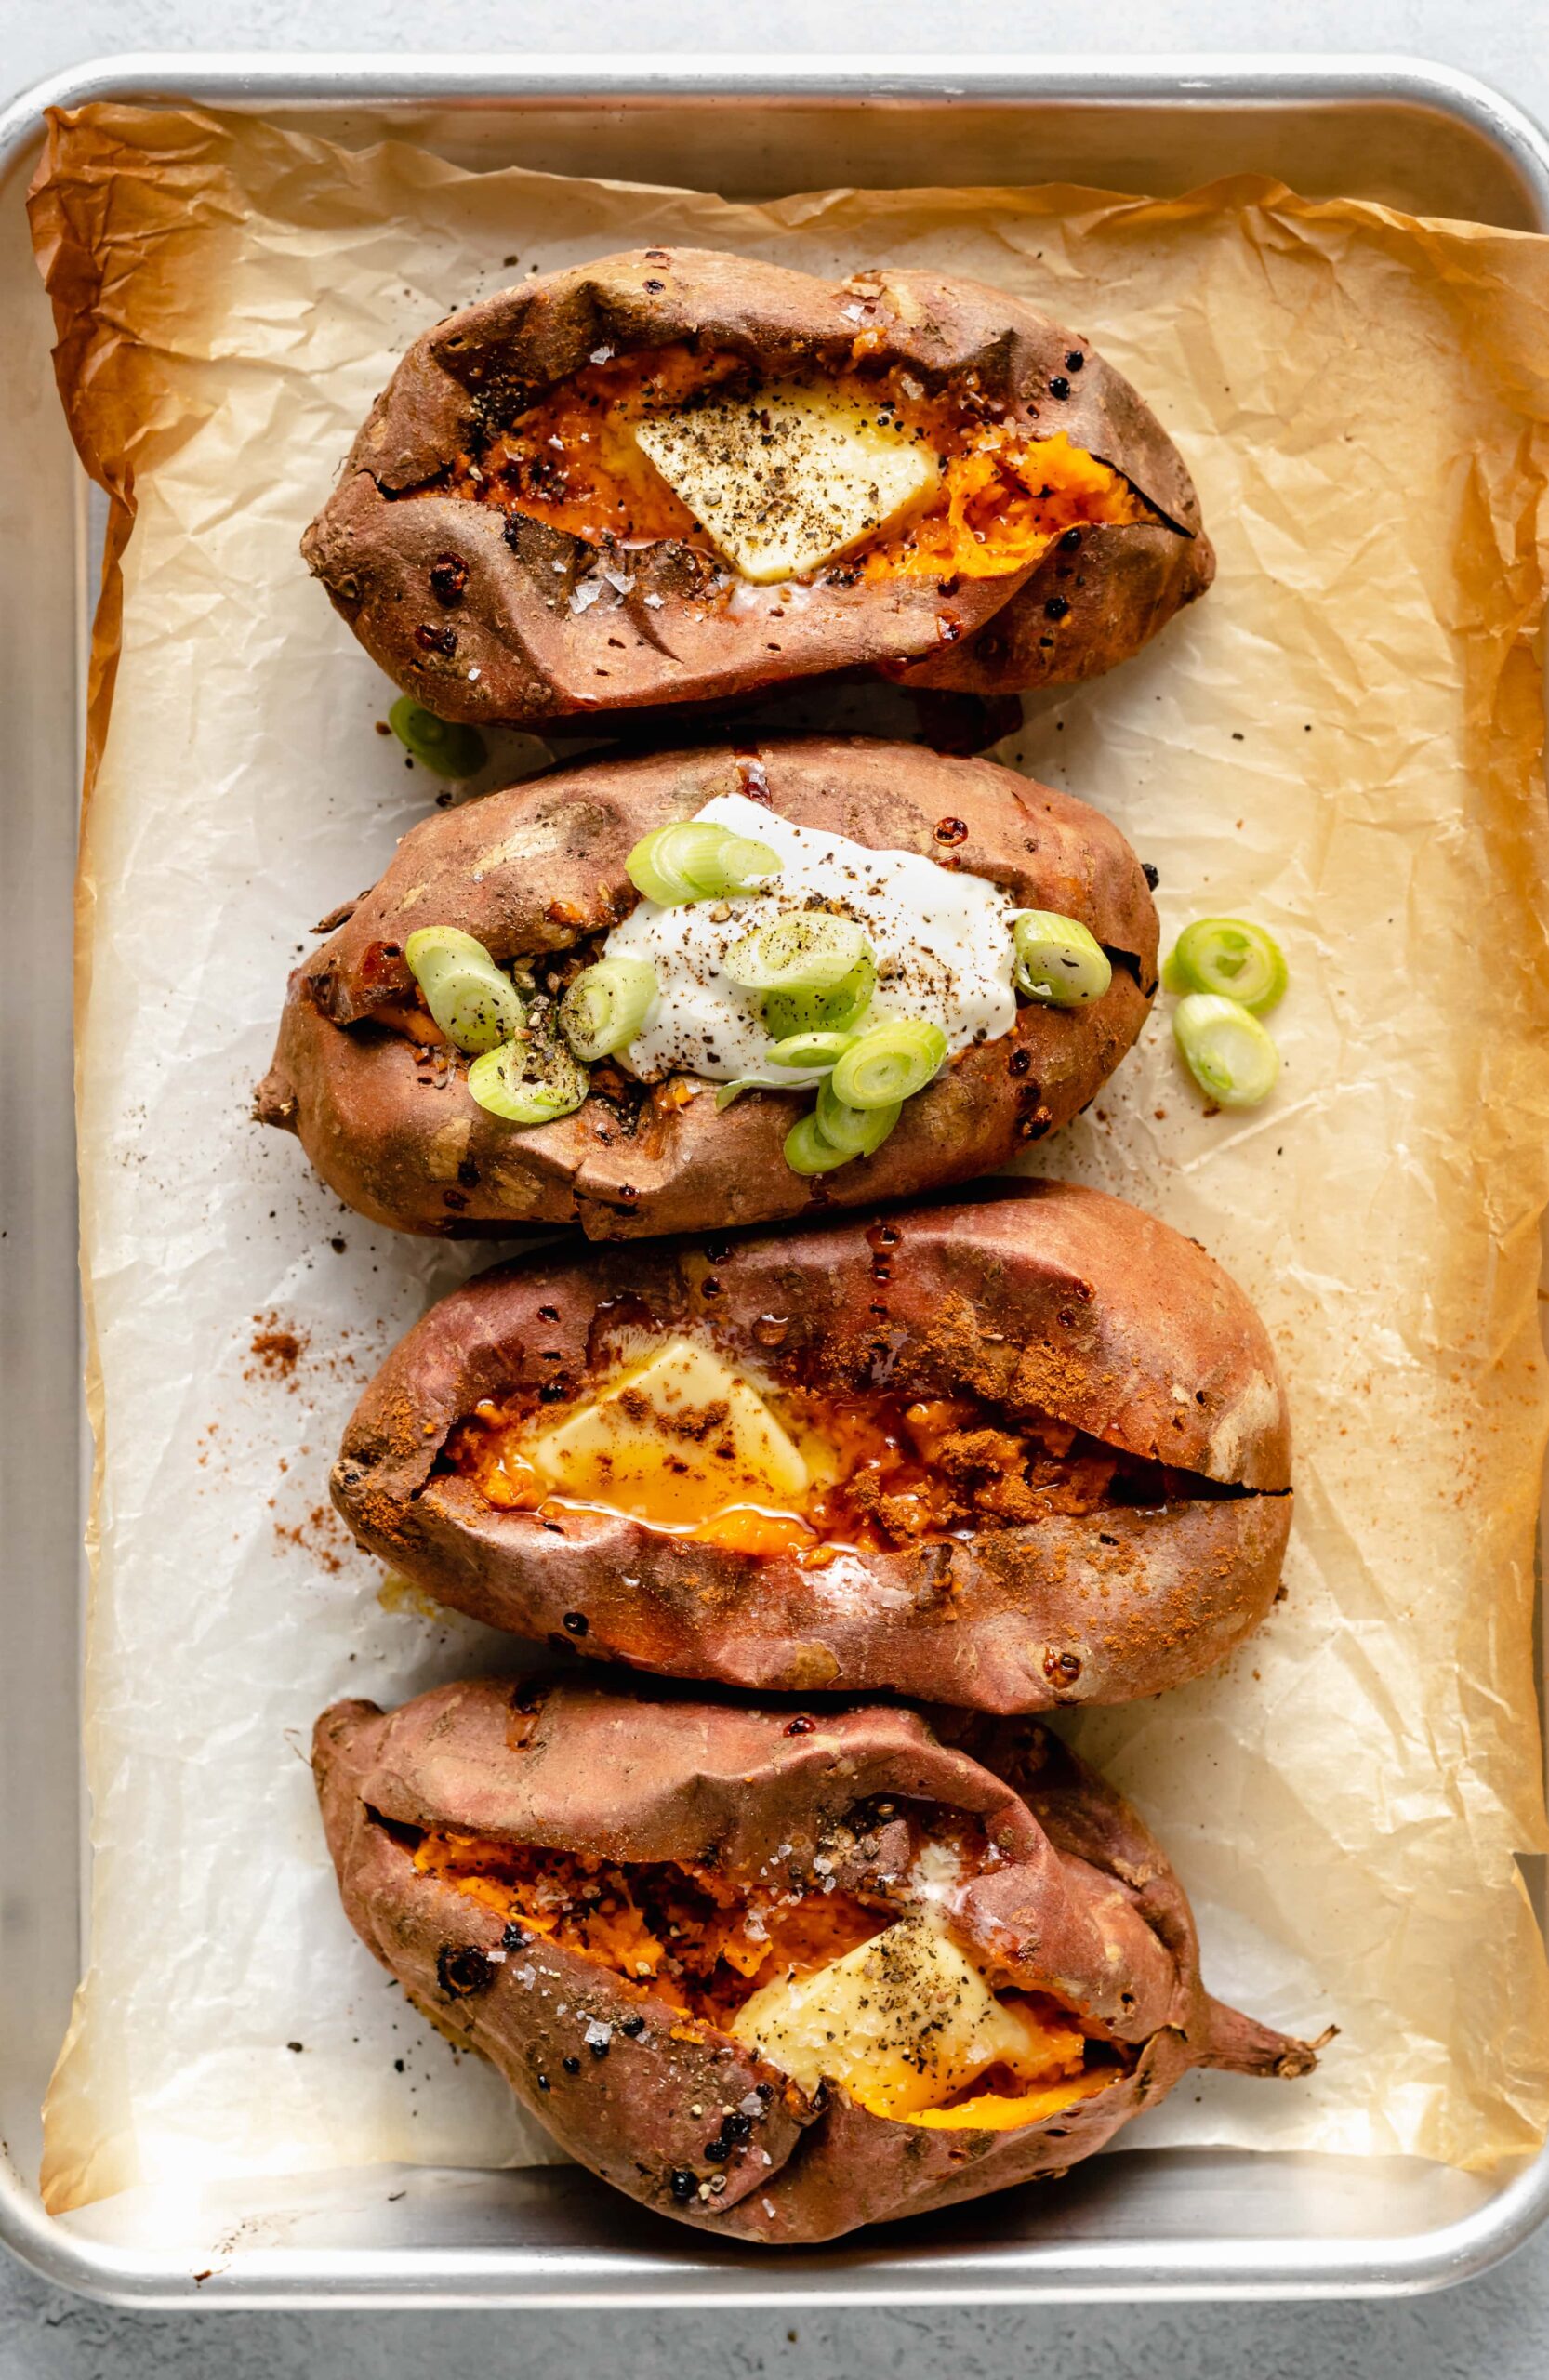 https://allthehealthythings.com/wp-content/uploads/2021/07/How-to-Bake-Sweet-Potatoes-4-scaled.jpg